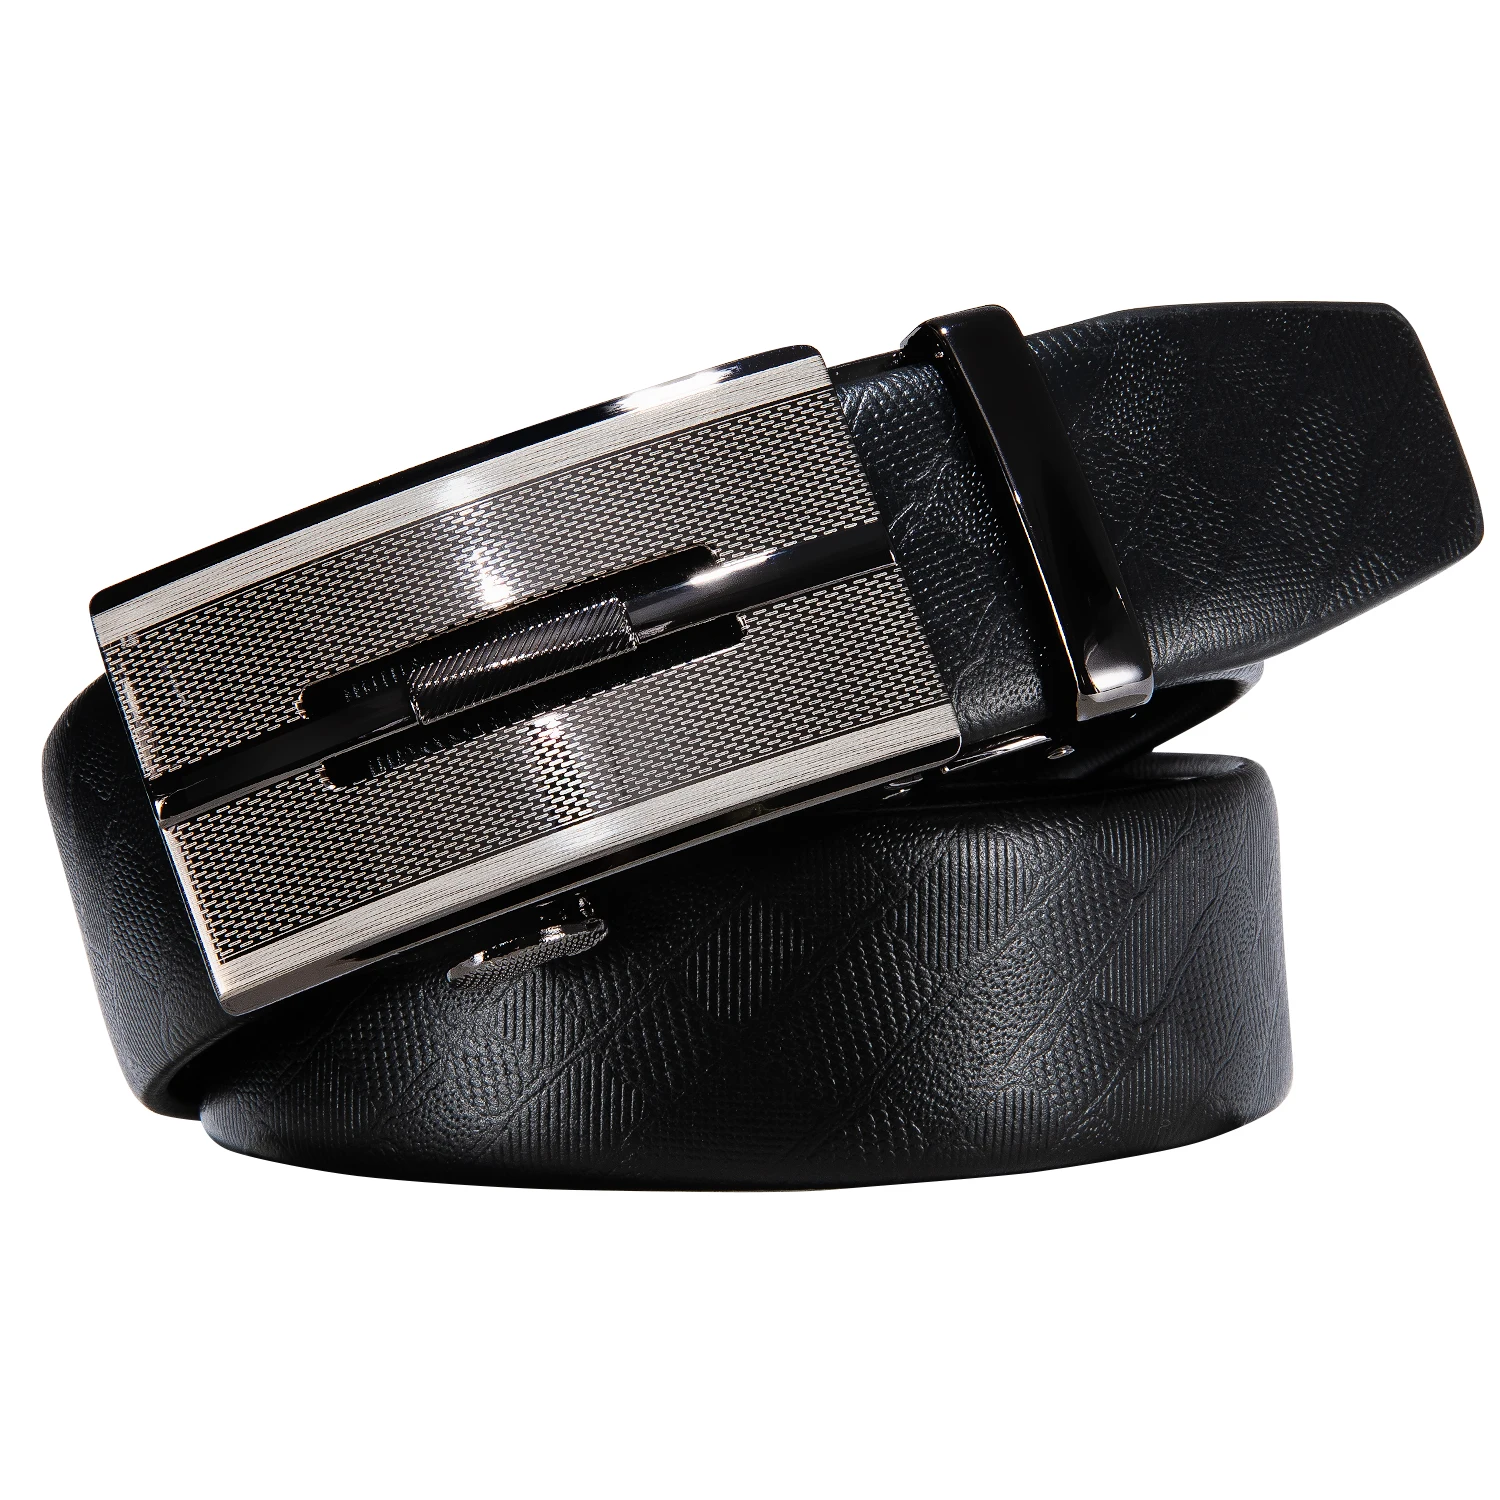 Dubulle Mens Leather Belt Metal Automatic Buckle Brand High Quality Luxury Belts for Men Famous Work Business Black Strap